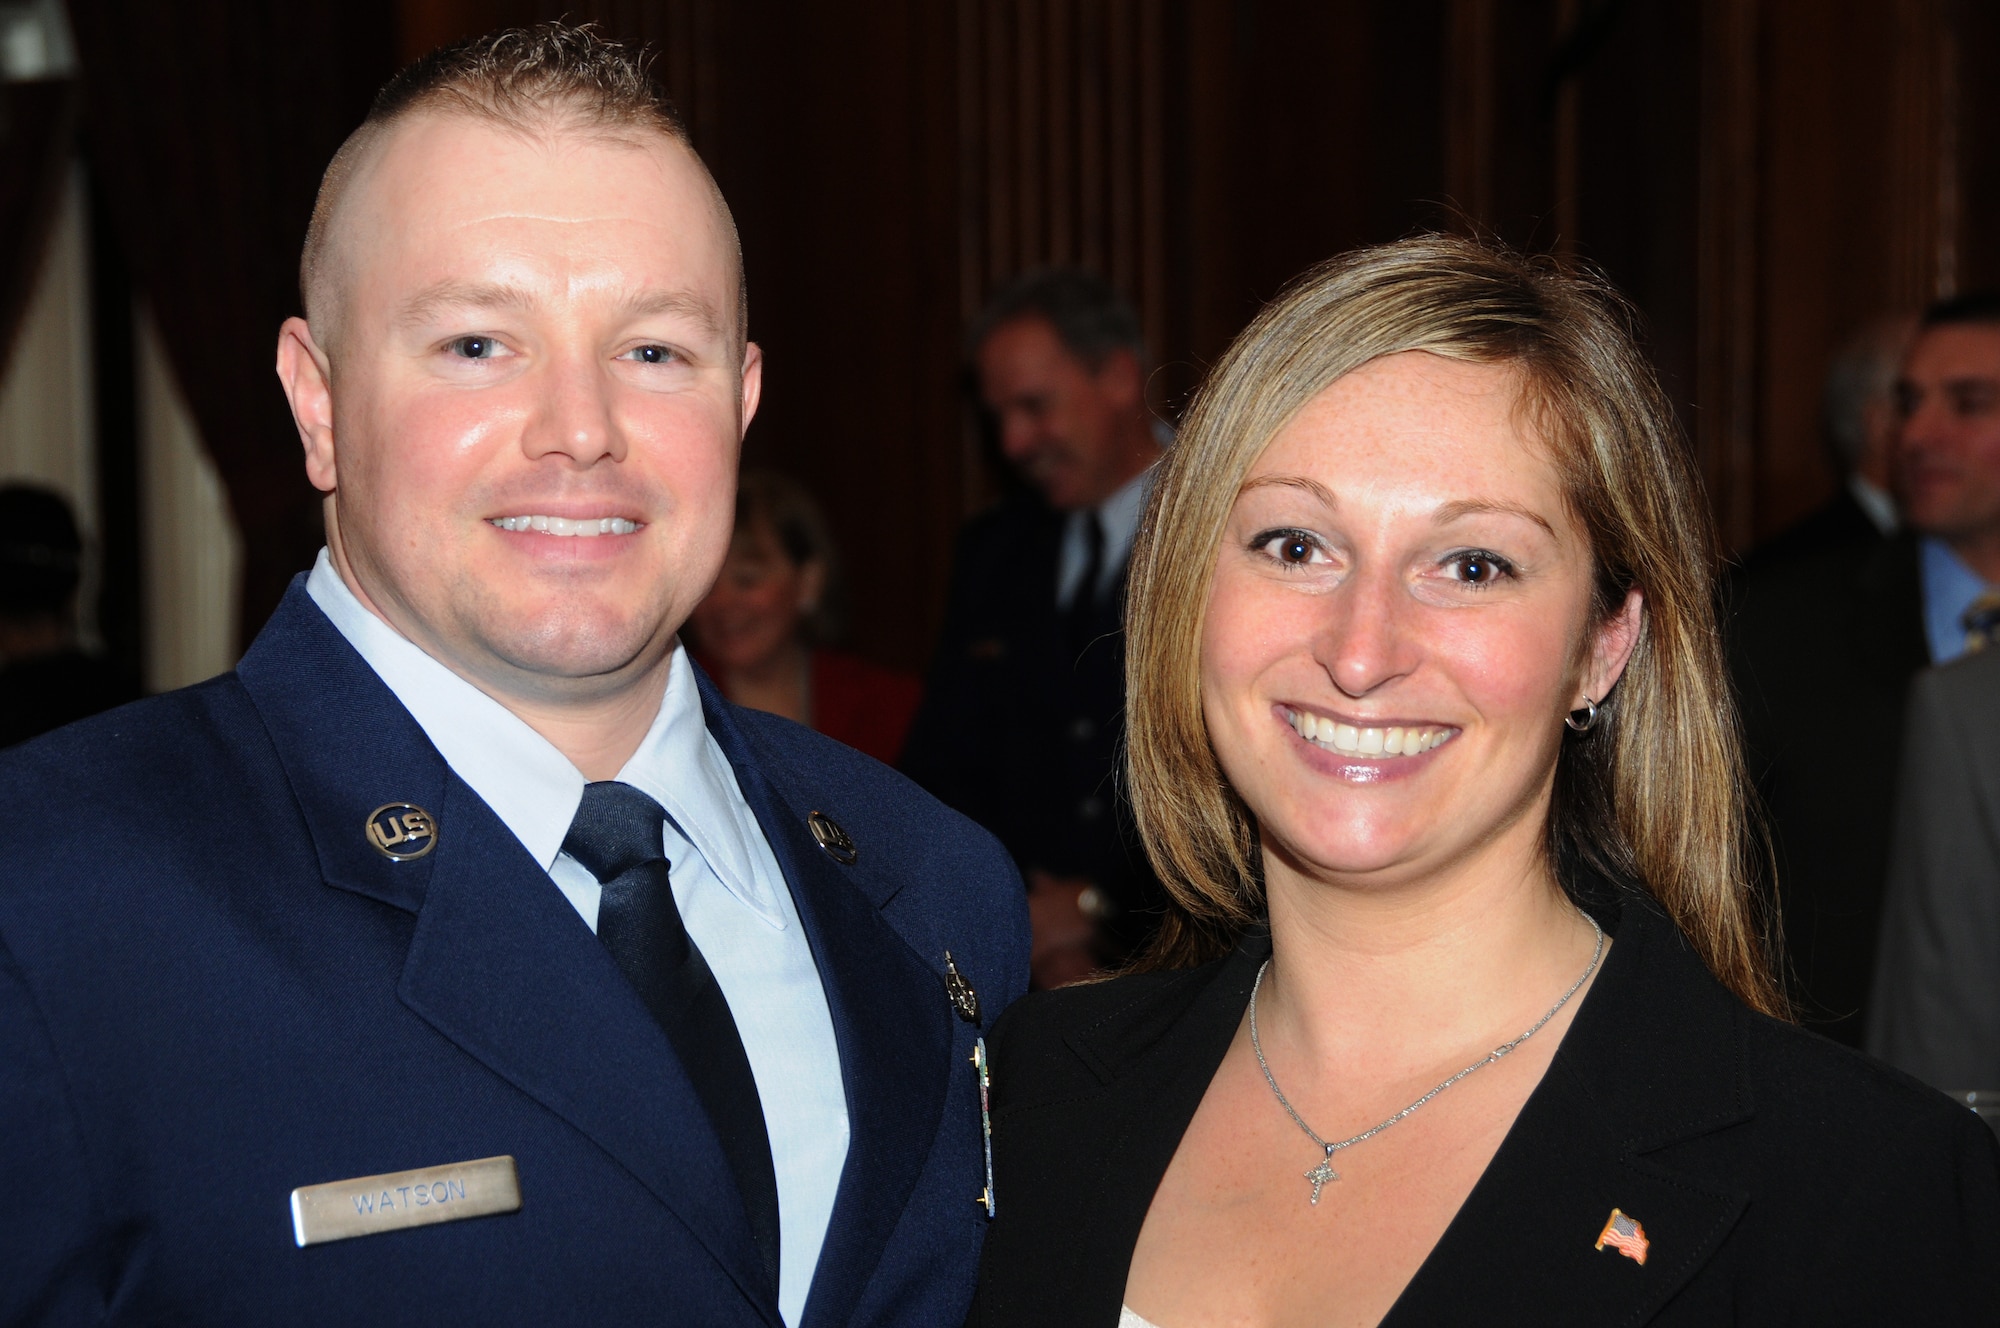 Tech. Sgt. Kevin Watson, recipient of the Pennsylvania’s Octavius V. Catto Medal, and wife Melissa, attend the presentation ceremony on Feb. 23 held at the Union League in Philadelphia. The Union League, celebrating over 150 years there, is host to numerous events honoring the military of the past, present and future.